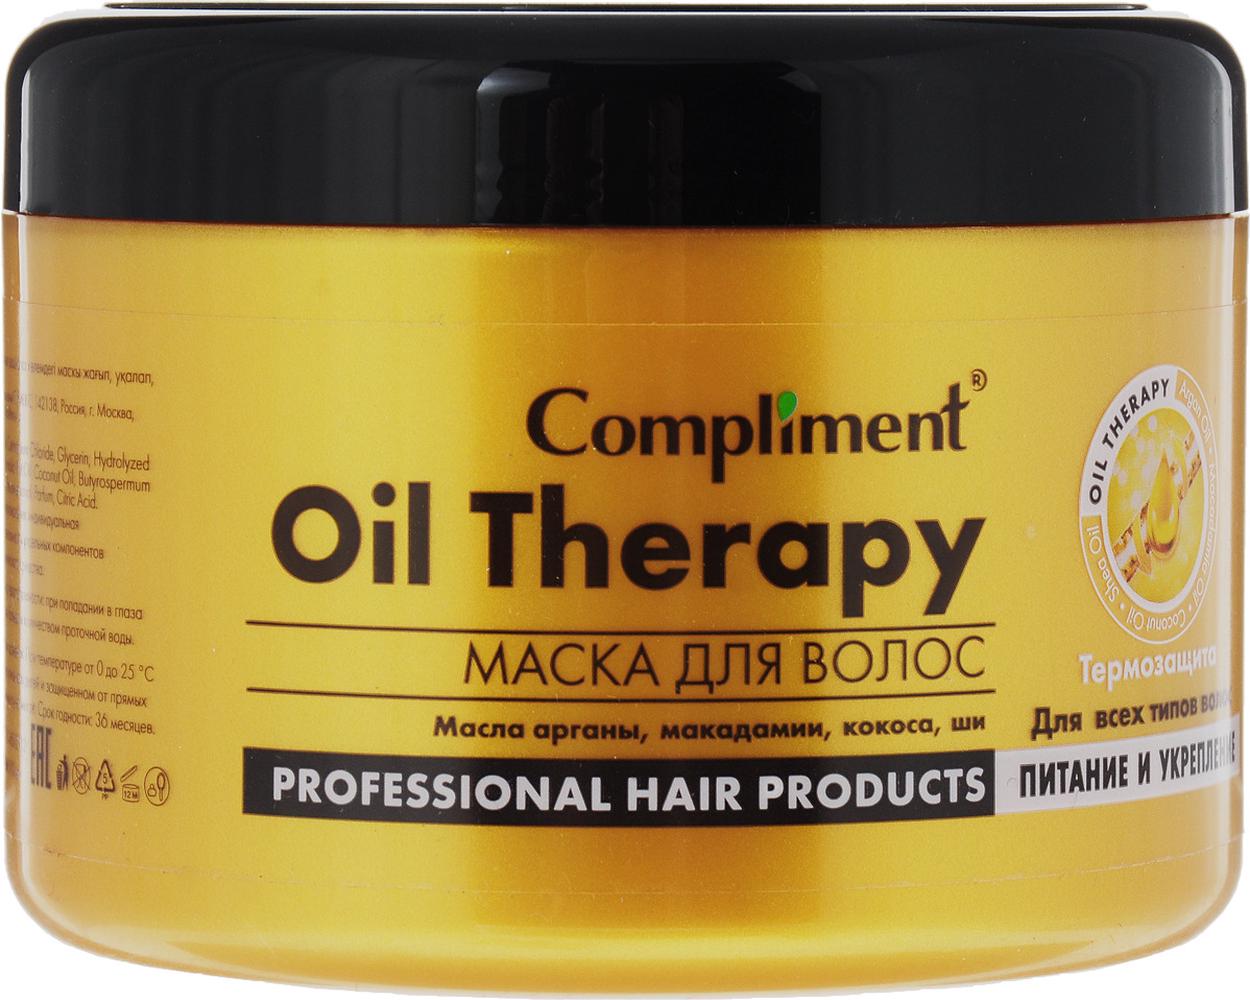 Therapy масло для волос. Compliment Oil Therapy маска. Compliment маска для волос 500мл Oil Therapy. Аргана оил маска для волос. Маска для волос комплимент Oil Therapy с маслом арганы.